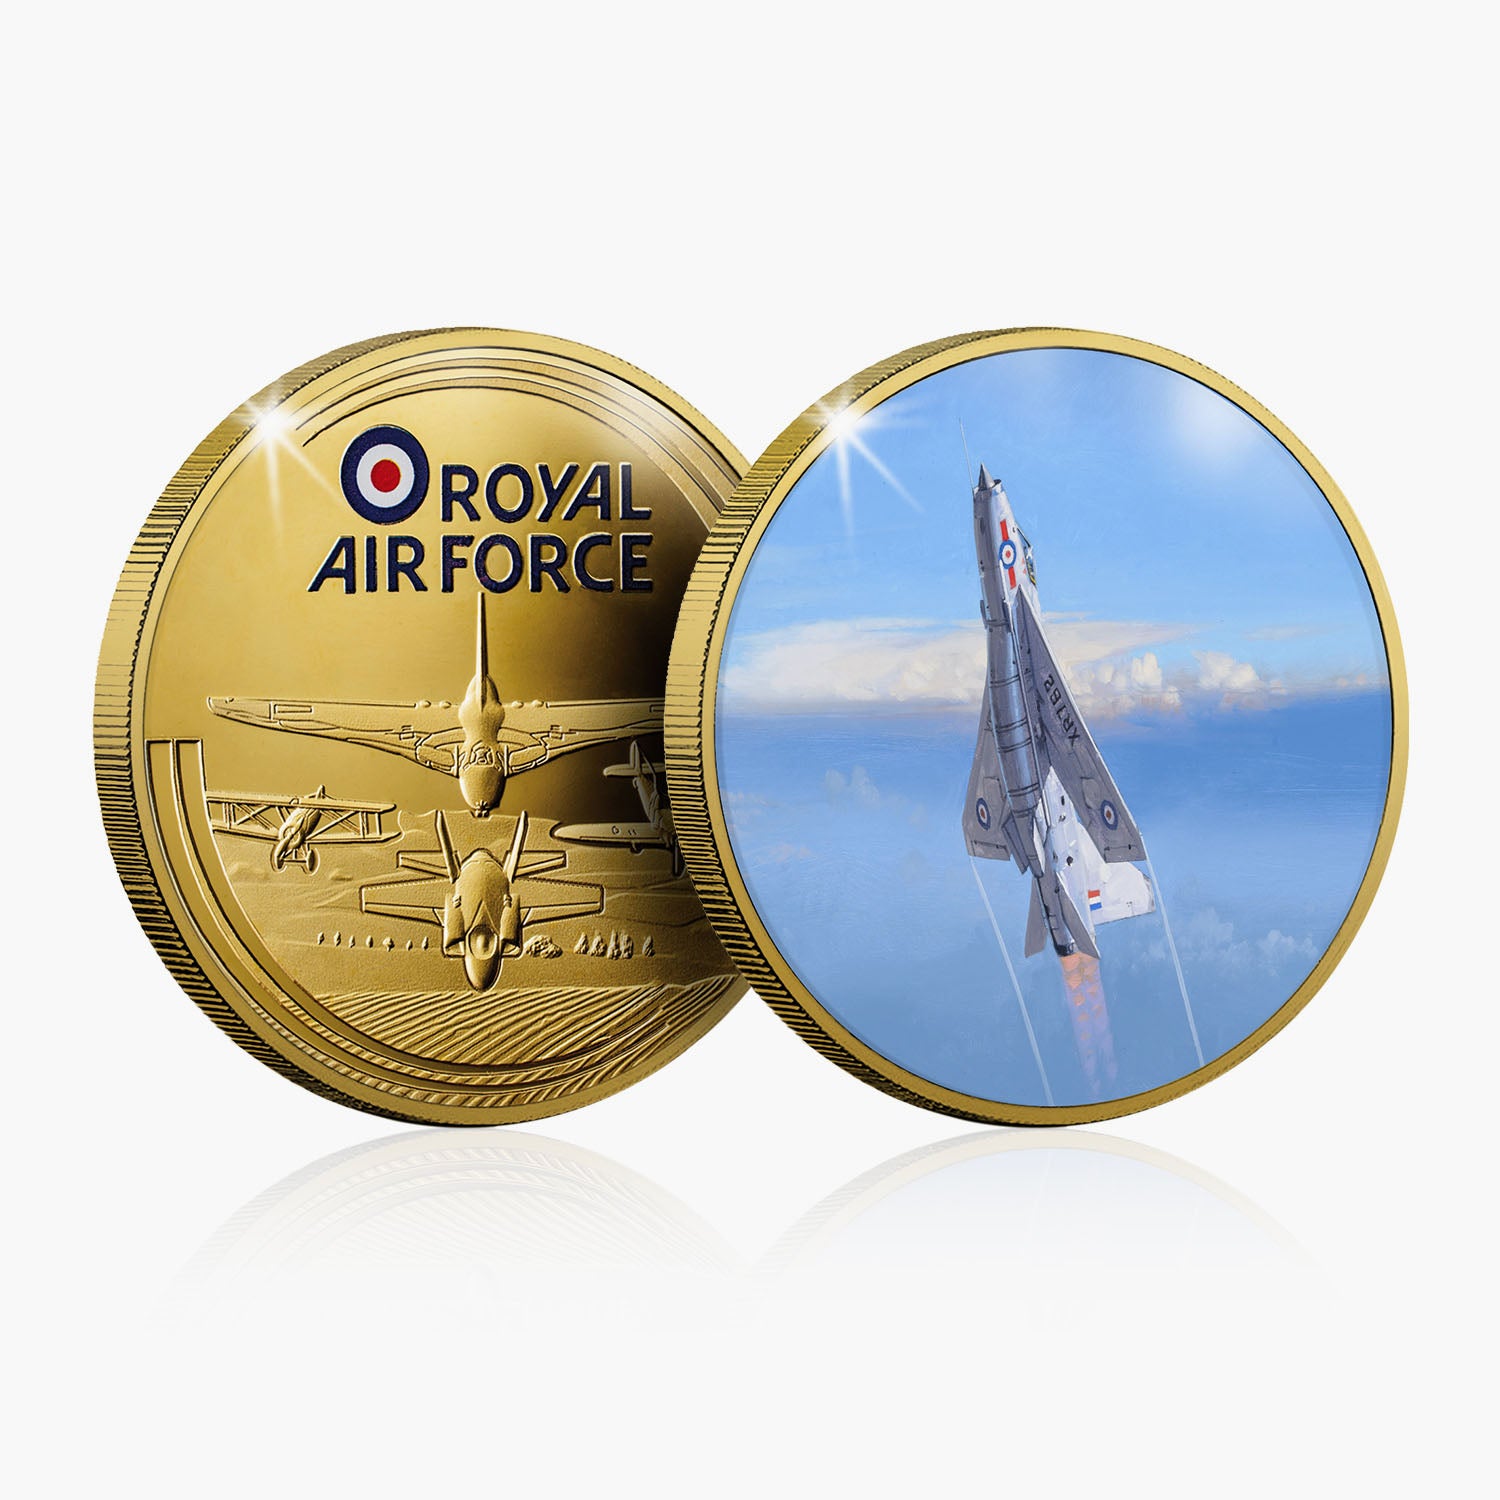 English Electric Lightning Complete Collection - Gold